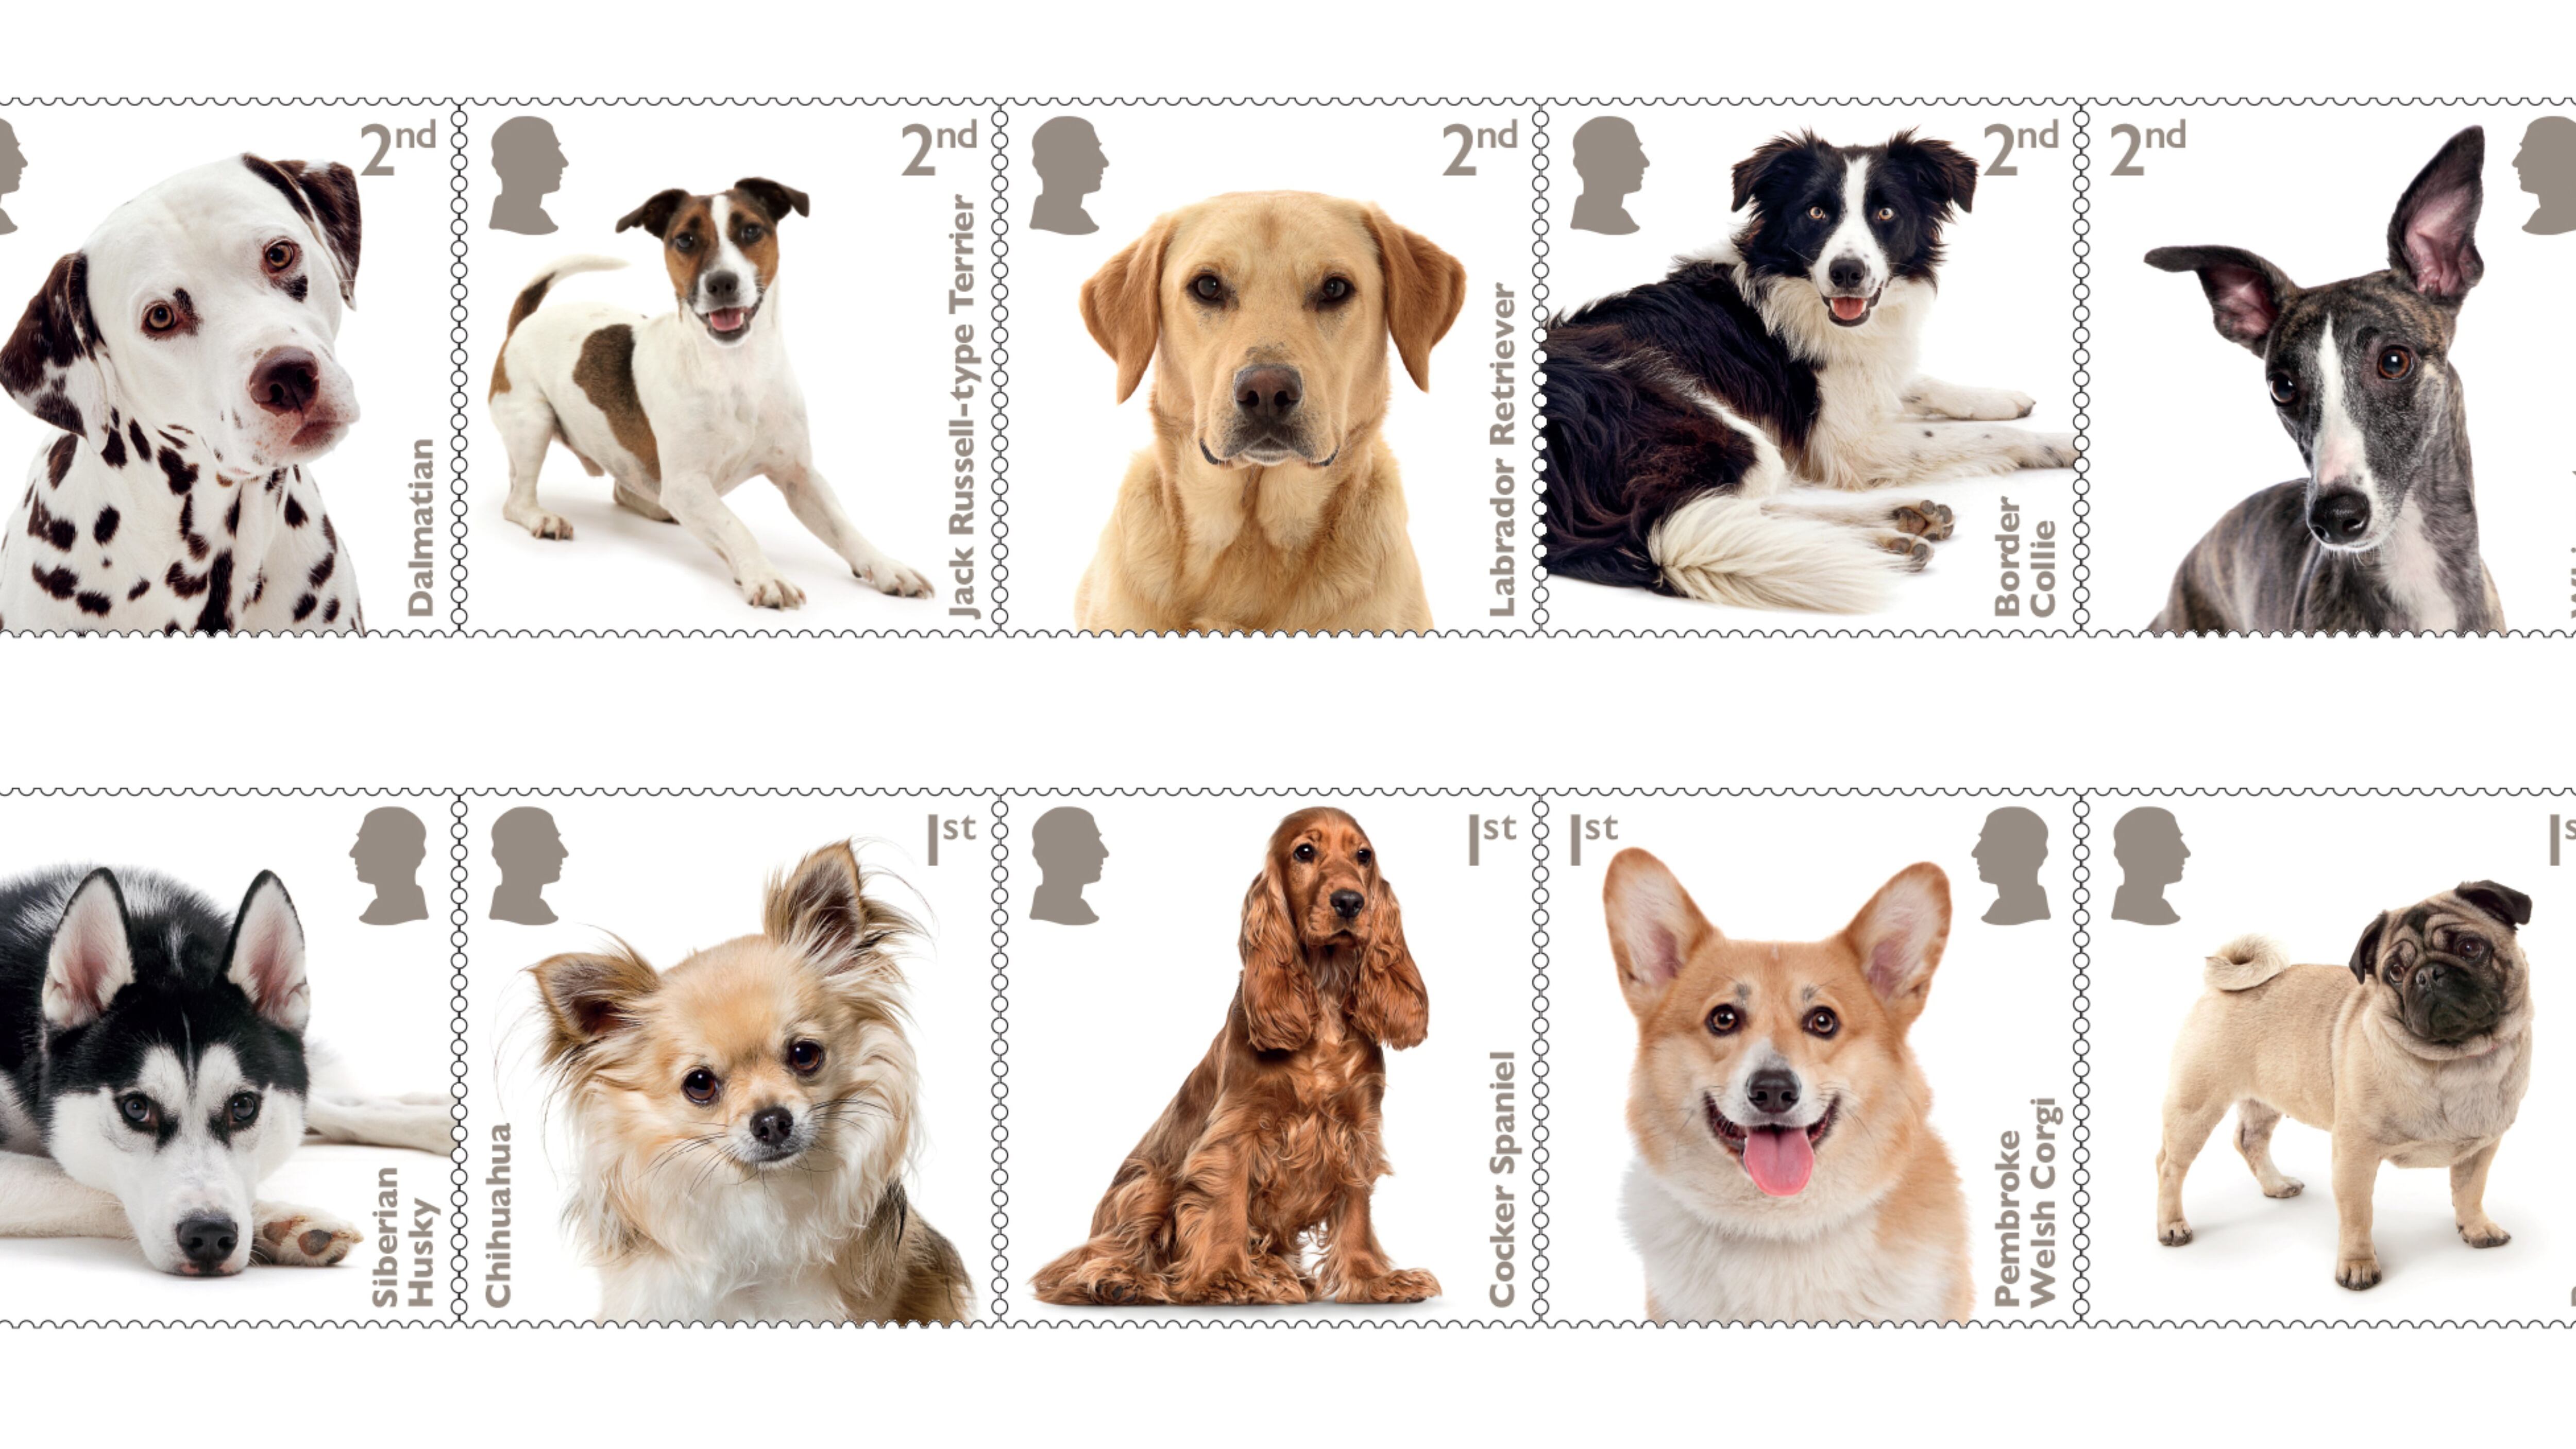 Royal Mail’s new set of stamps featuring images of some of the nation’s favourite dog breeds